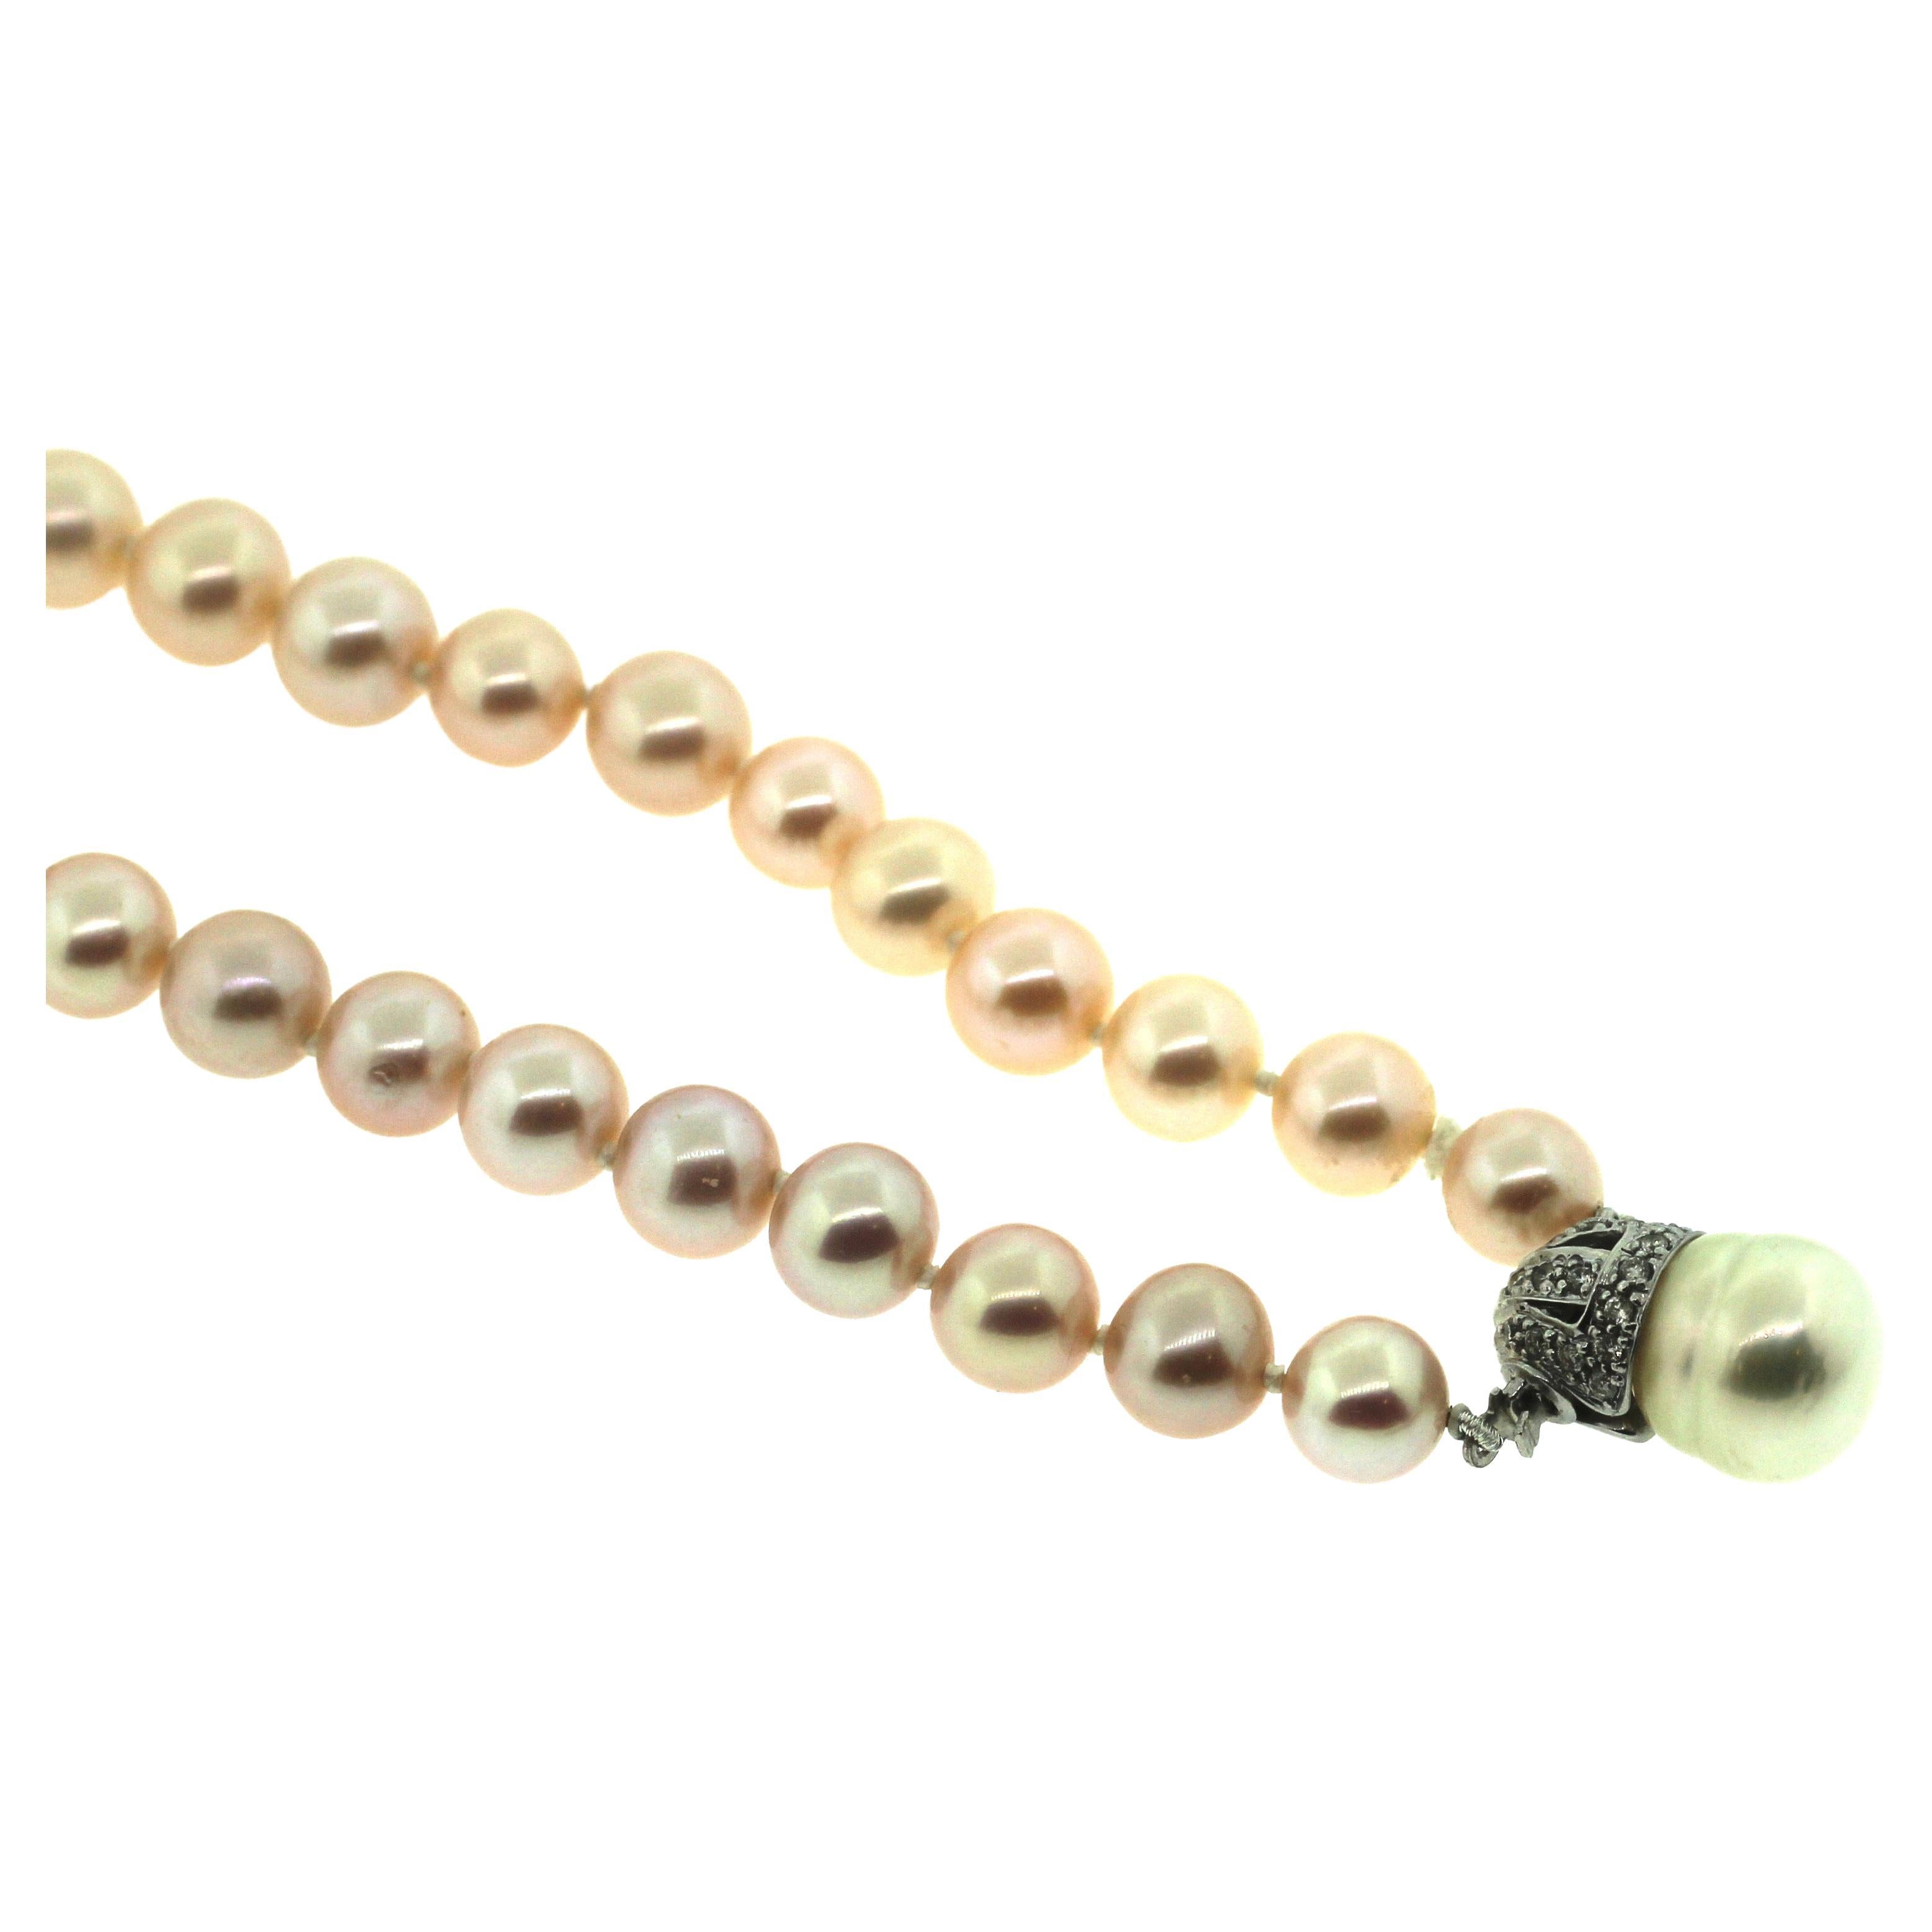 Hakimoto Pink Cultured Pearl Necklace
18K Diamonds Clacp
16.5 inches
8-7mm
All measurements and sizes and color are approximate 